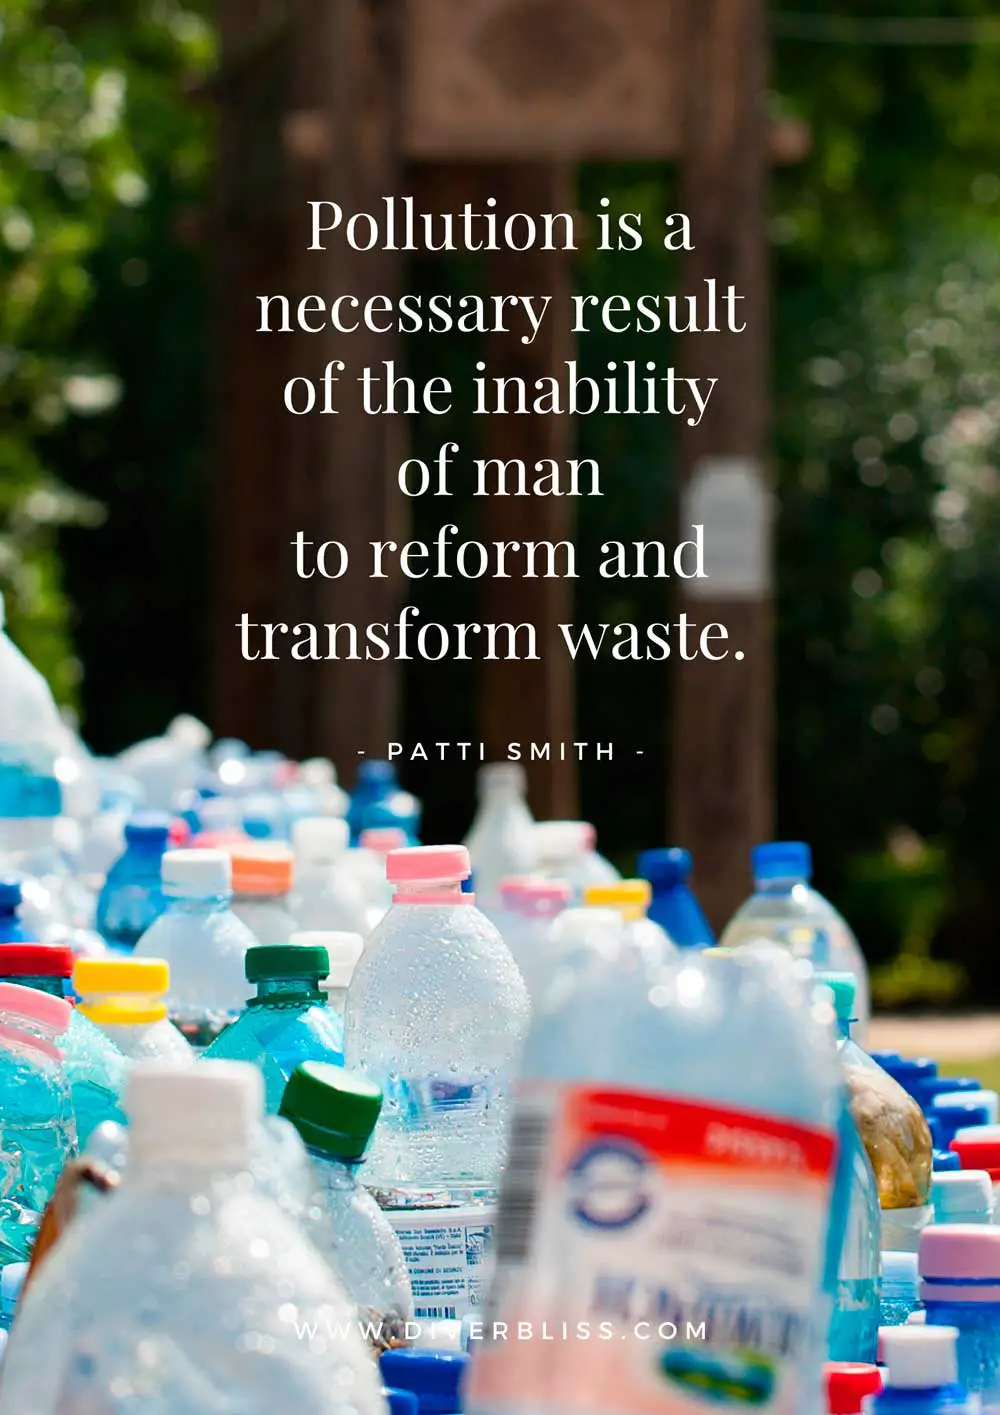 Plastic Waste Quotes Poster: "Pollution is a necessary result of the inability of man to reform and transform waste.”– Patti Smith